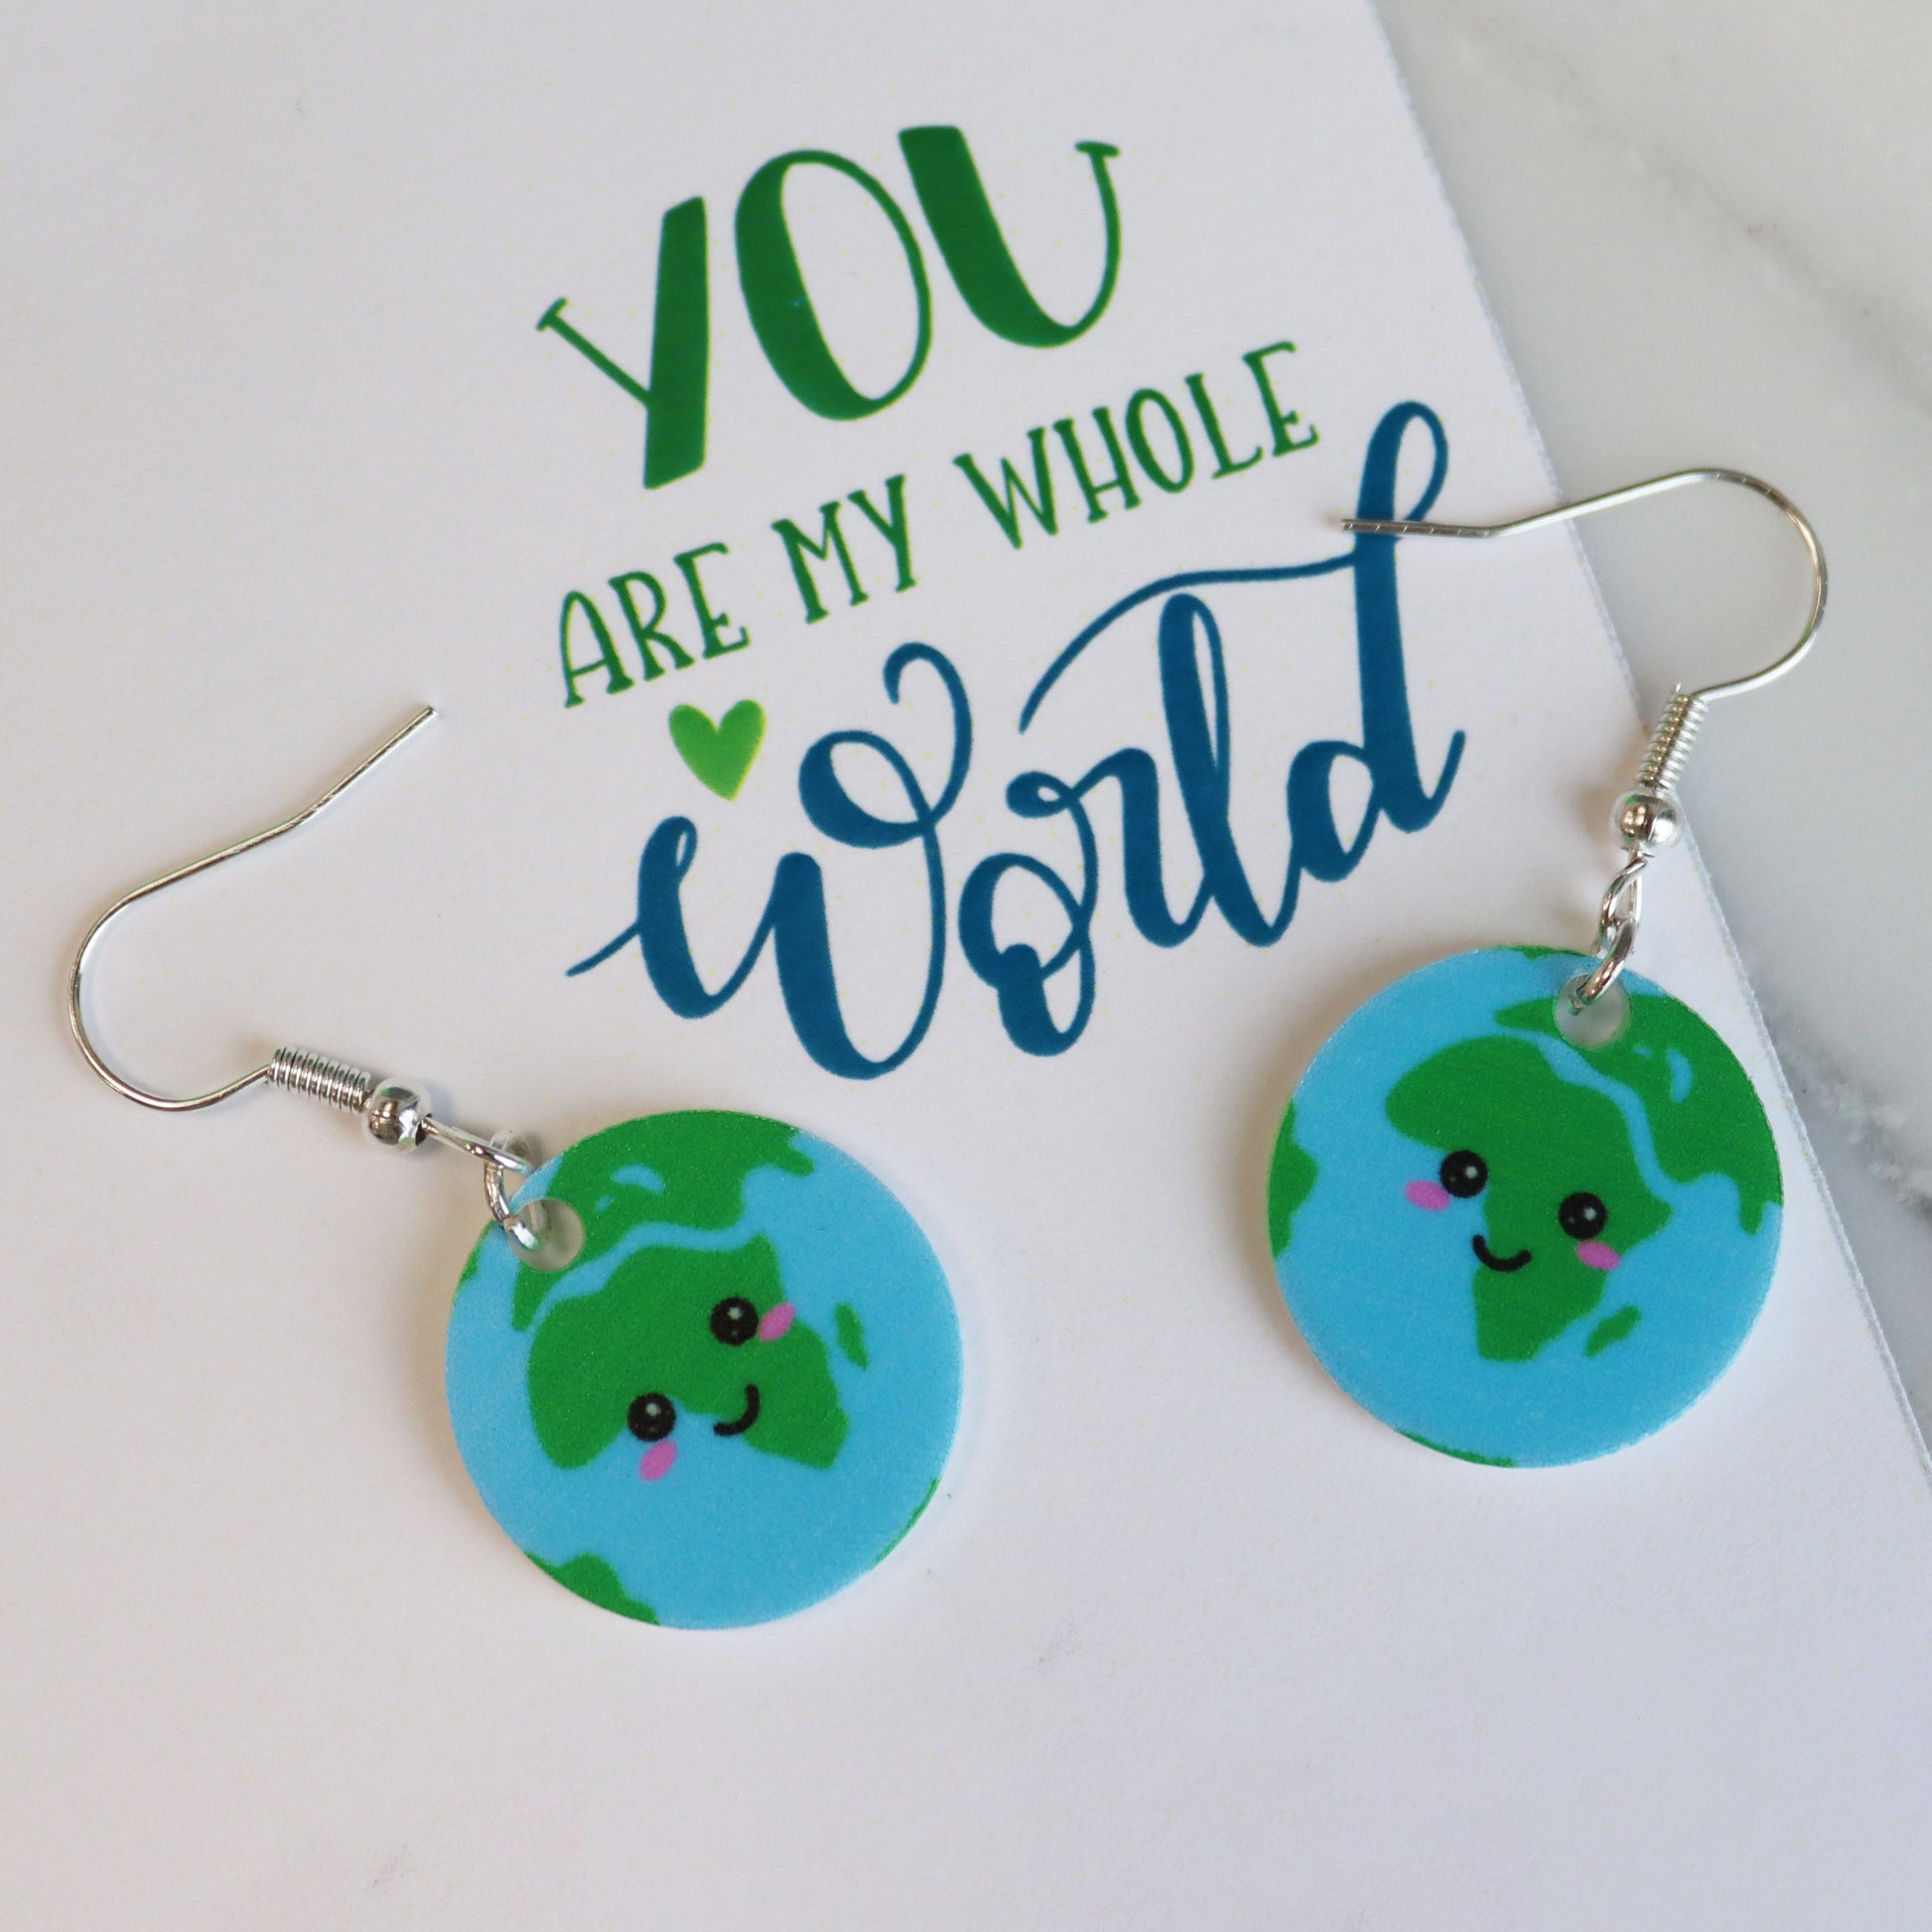 You are my whole world fun kawaii based earth earrings shown in white background gift for Valentine&#39;s Day